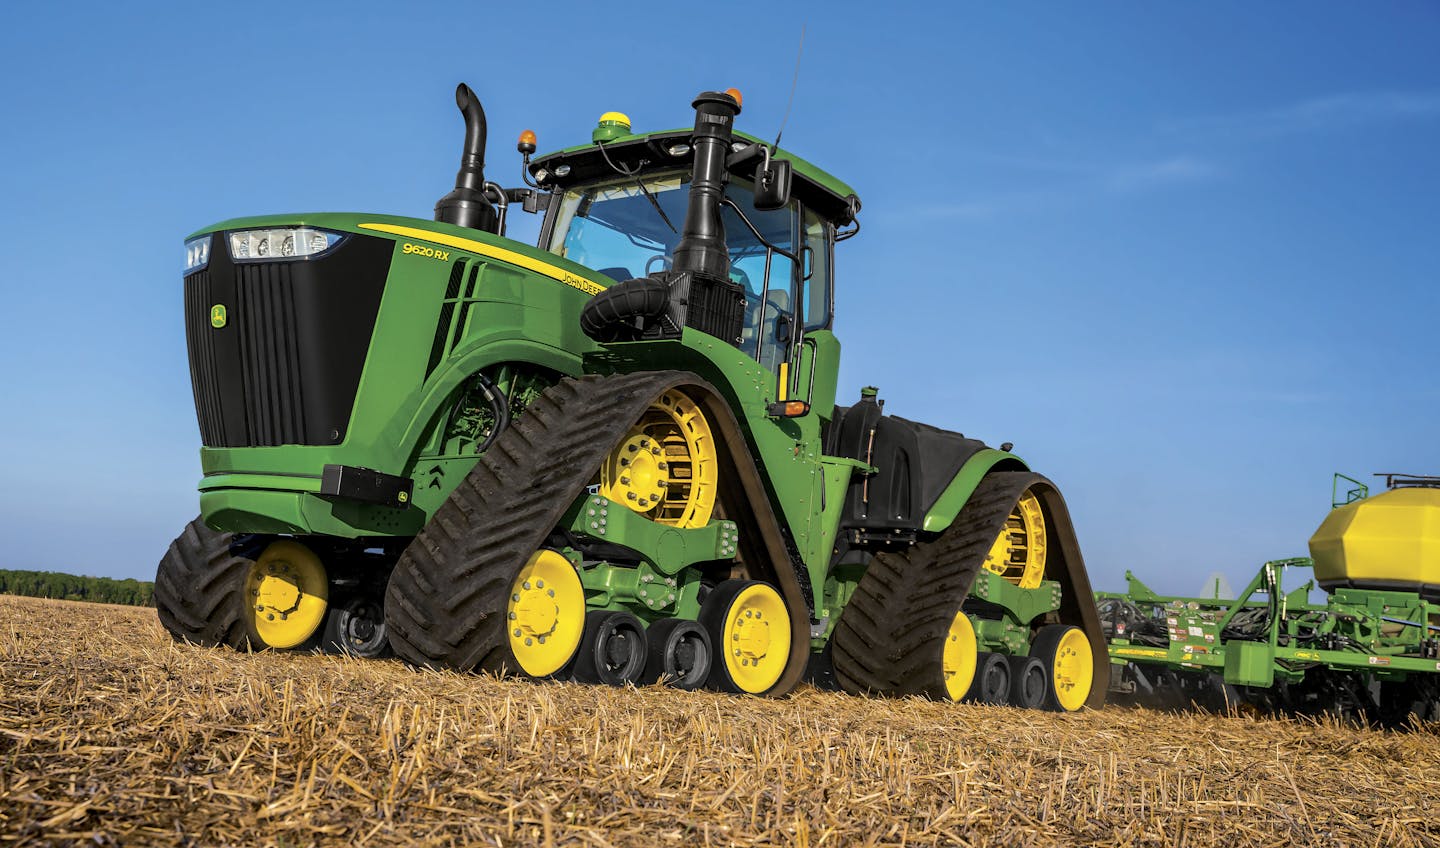 John Deere offers four models of four-track tractors as part of its 9RX series.